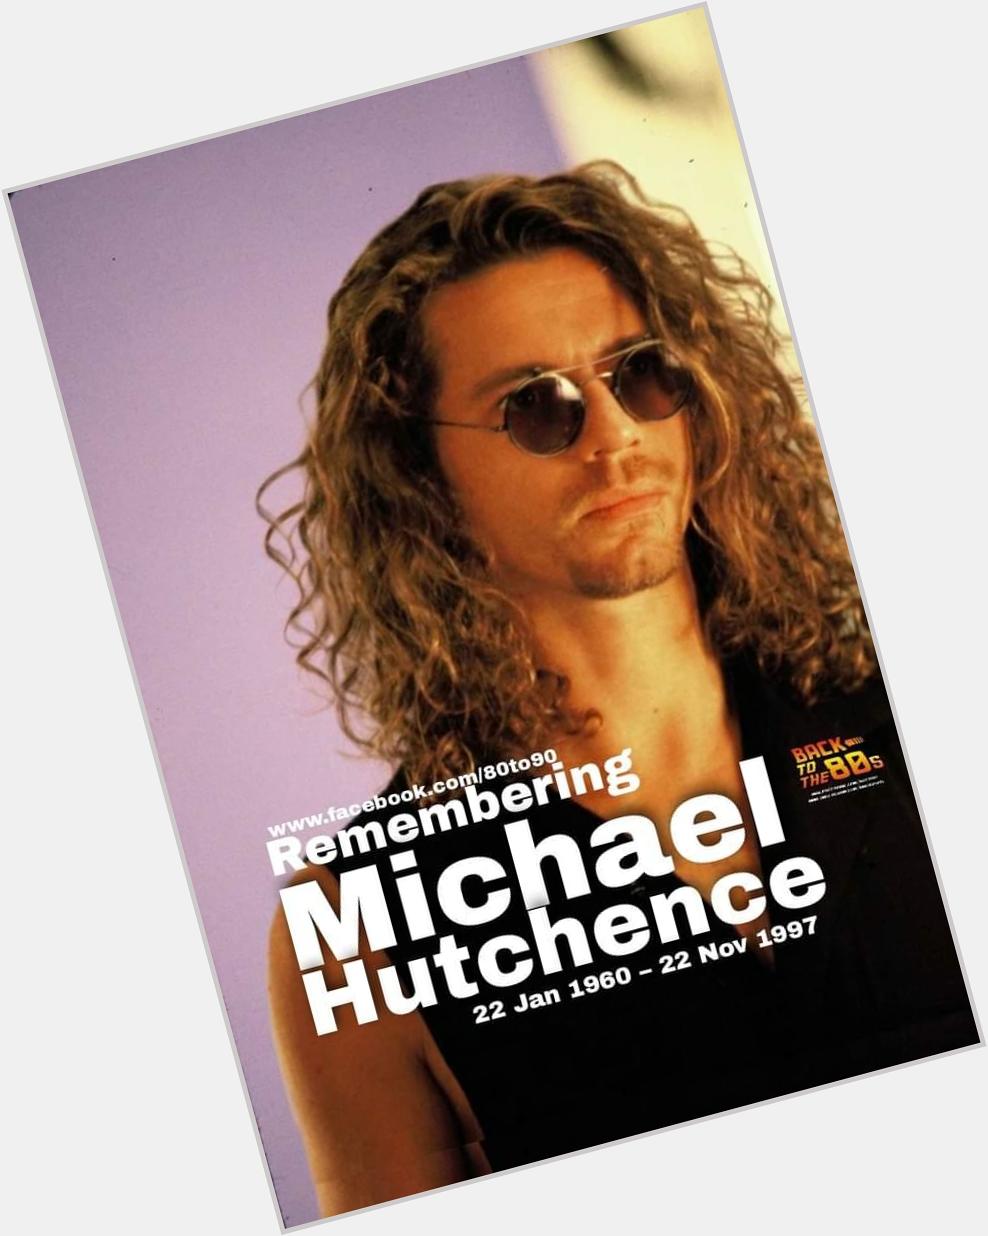 Happy Birthday to the late great Michael Hutchence 